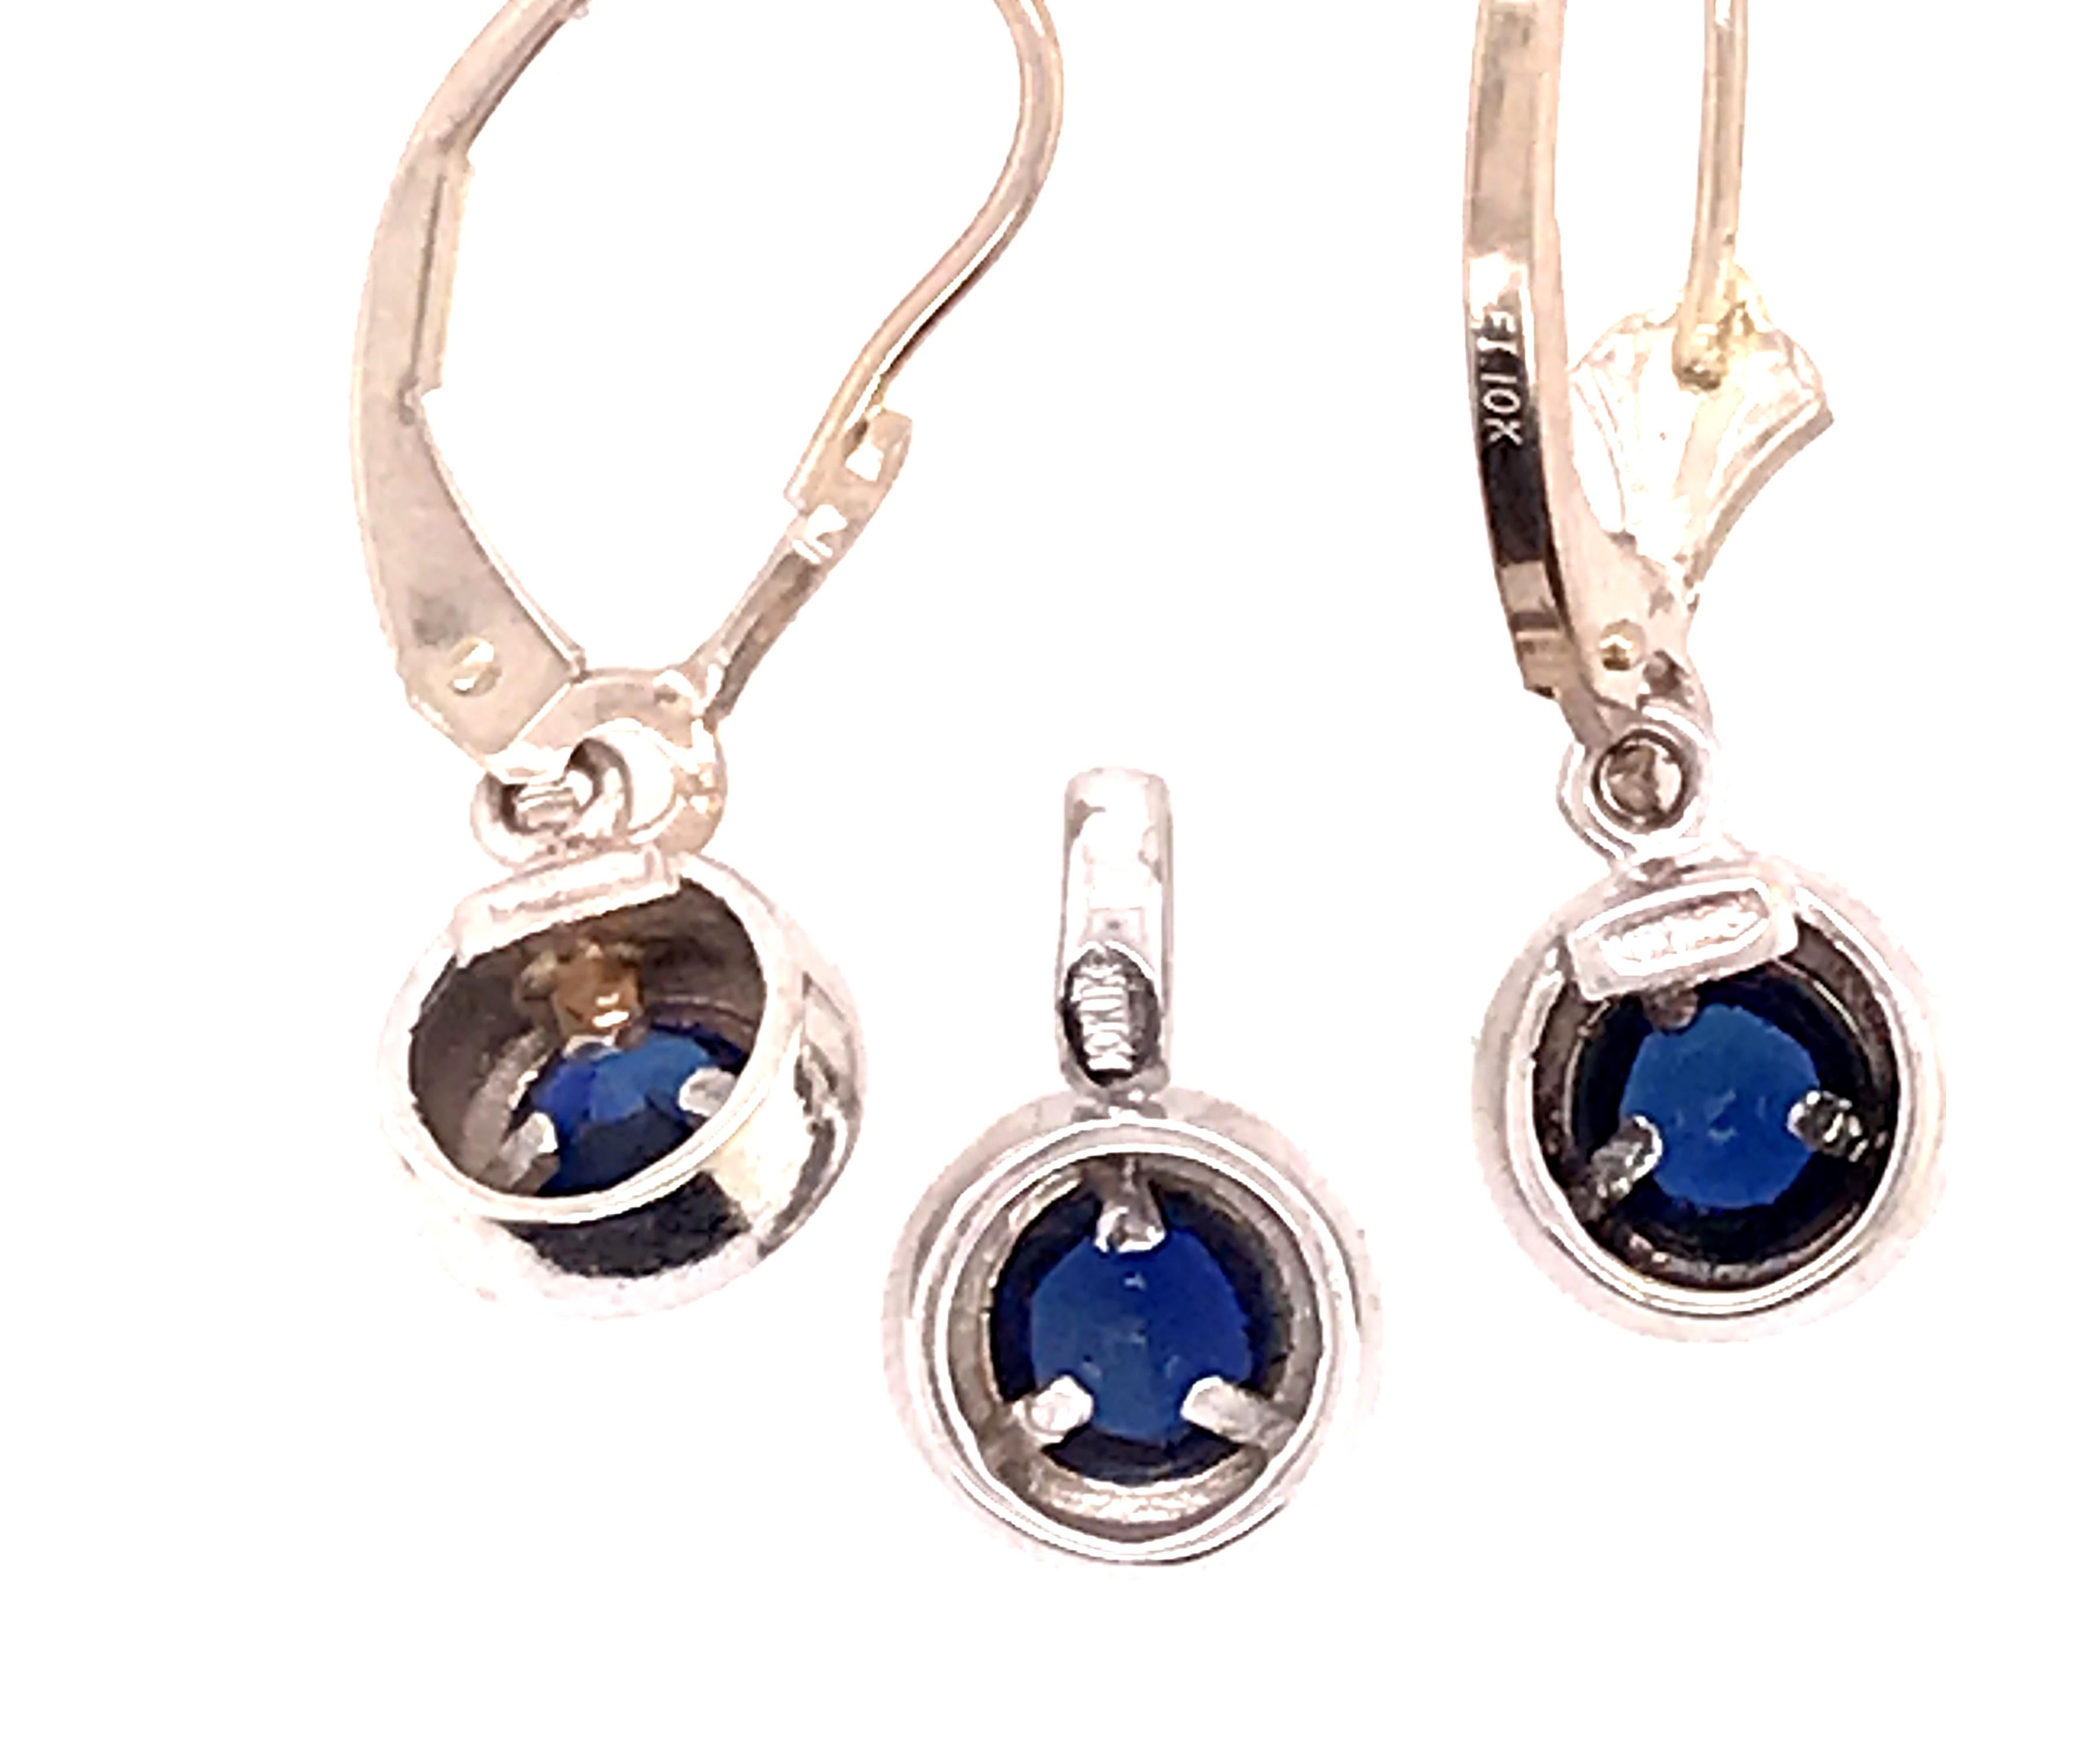 Sapphire Earrings Pendant Set 1ct White Gold September Birthstone Leverback In Excellent Condition For Sale In Dearborn, MI